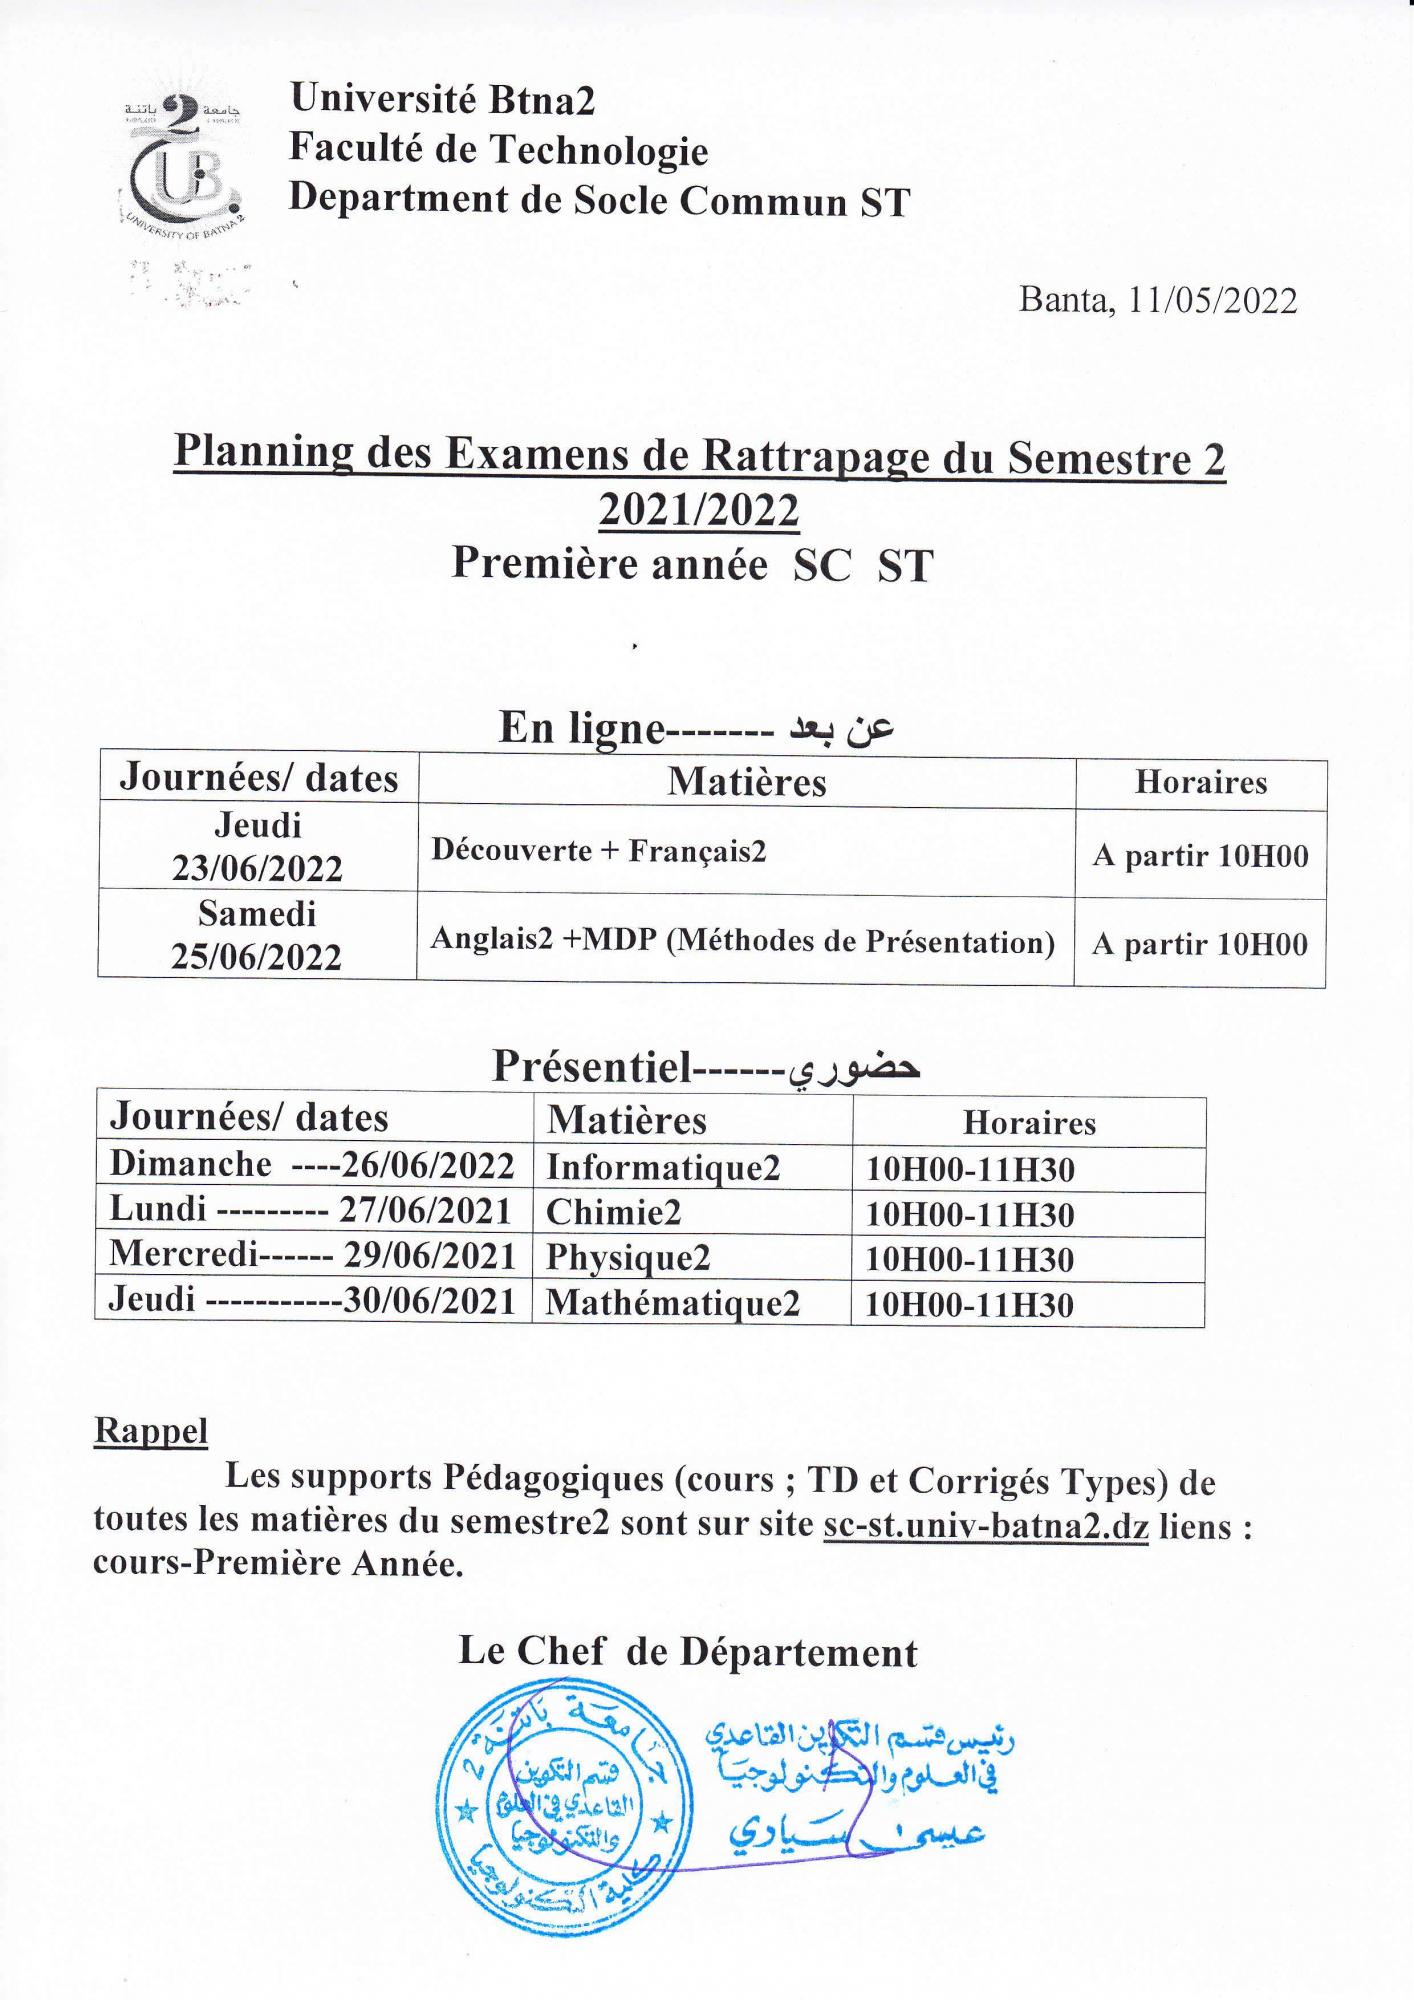 planning_examens_rattrapage_st_21-22_s2-